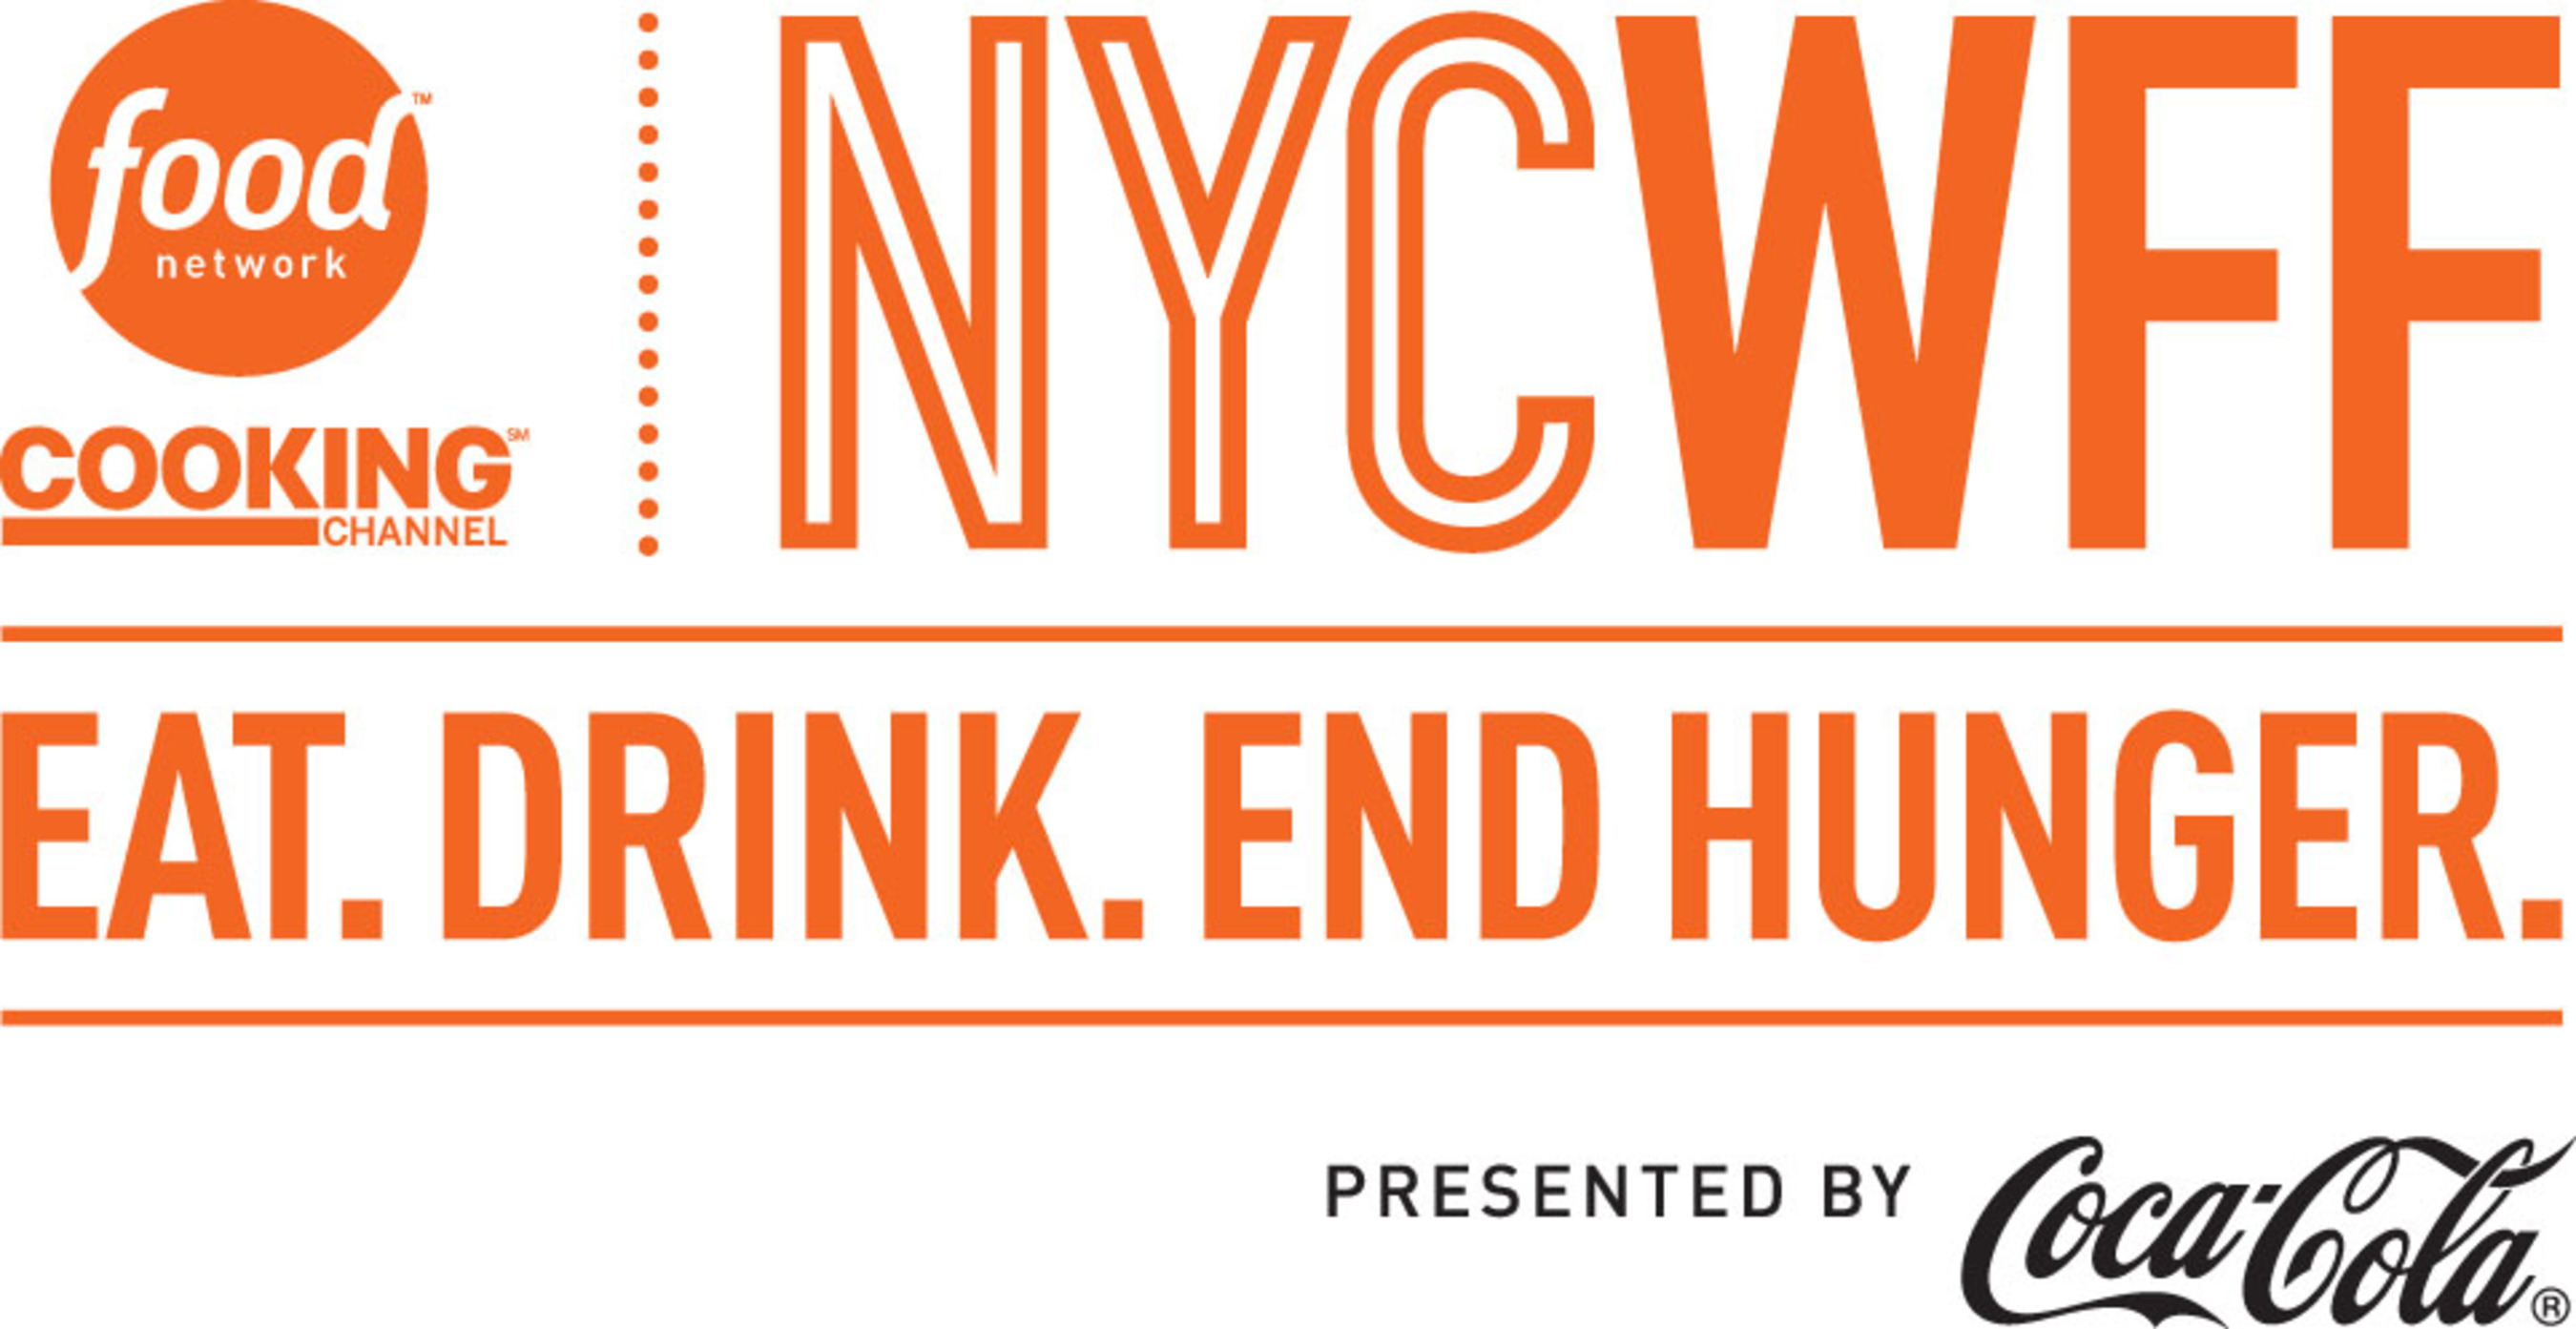 100% of the net proceeds from the Food Network & Cooking Channel New York City Wine & Food Festival benefit the hunger-relief organizations No Kid Hungry(R) and Food Bank For New York City.